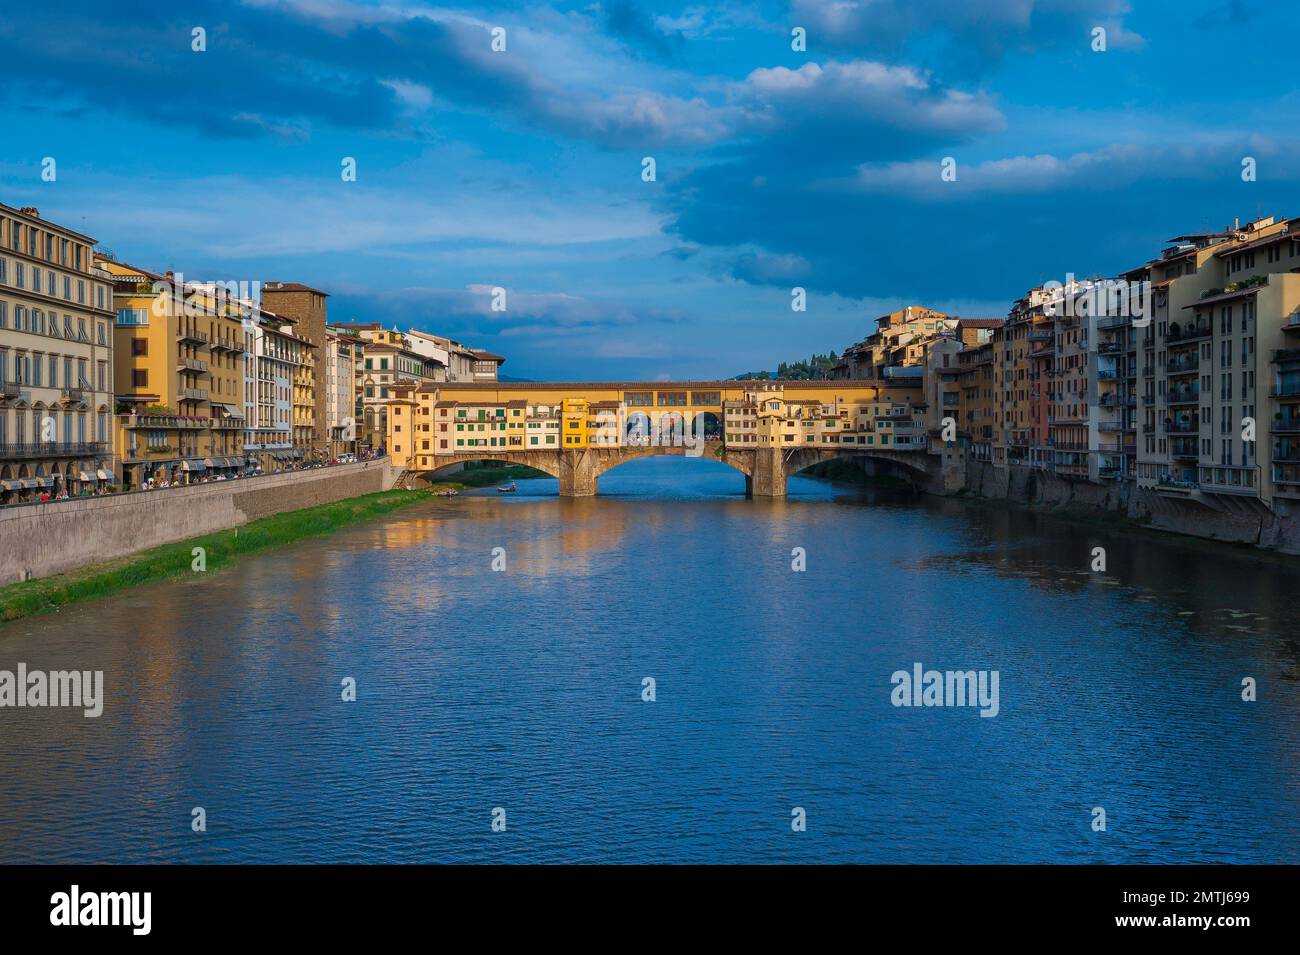 Ponte Vecchio Florence, view at sunset of the Ponte Vecchio bridge spanning the River Arno, Florence, Firenze, Tuscany, Italy. Stock Photo